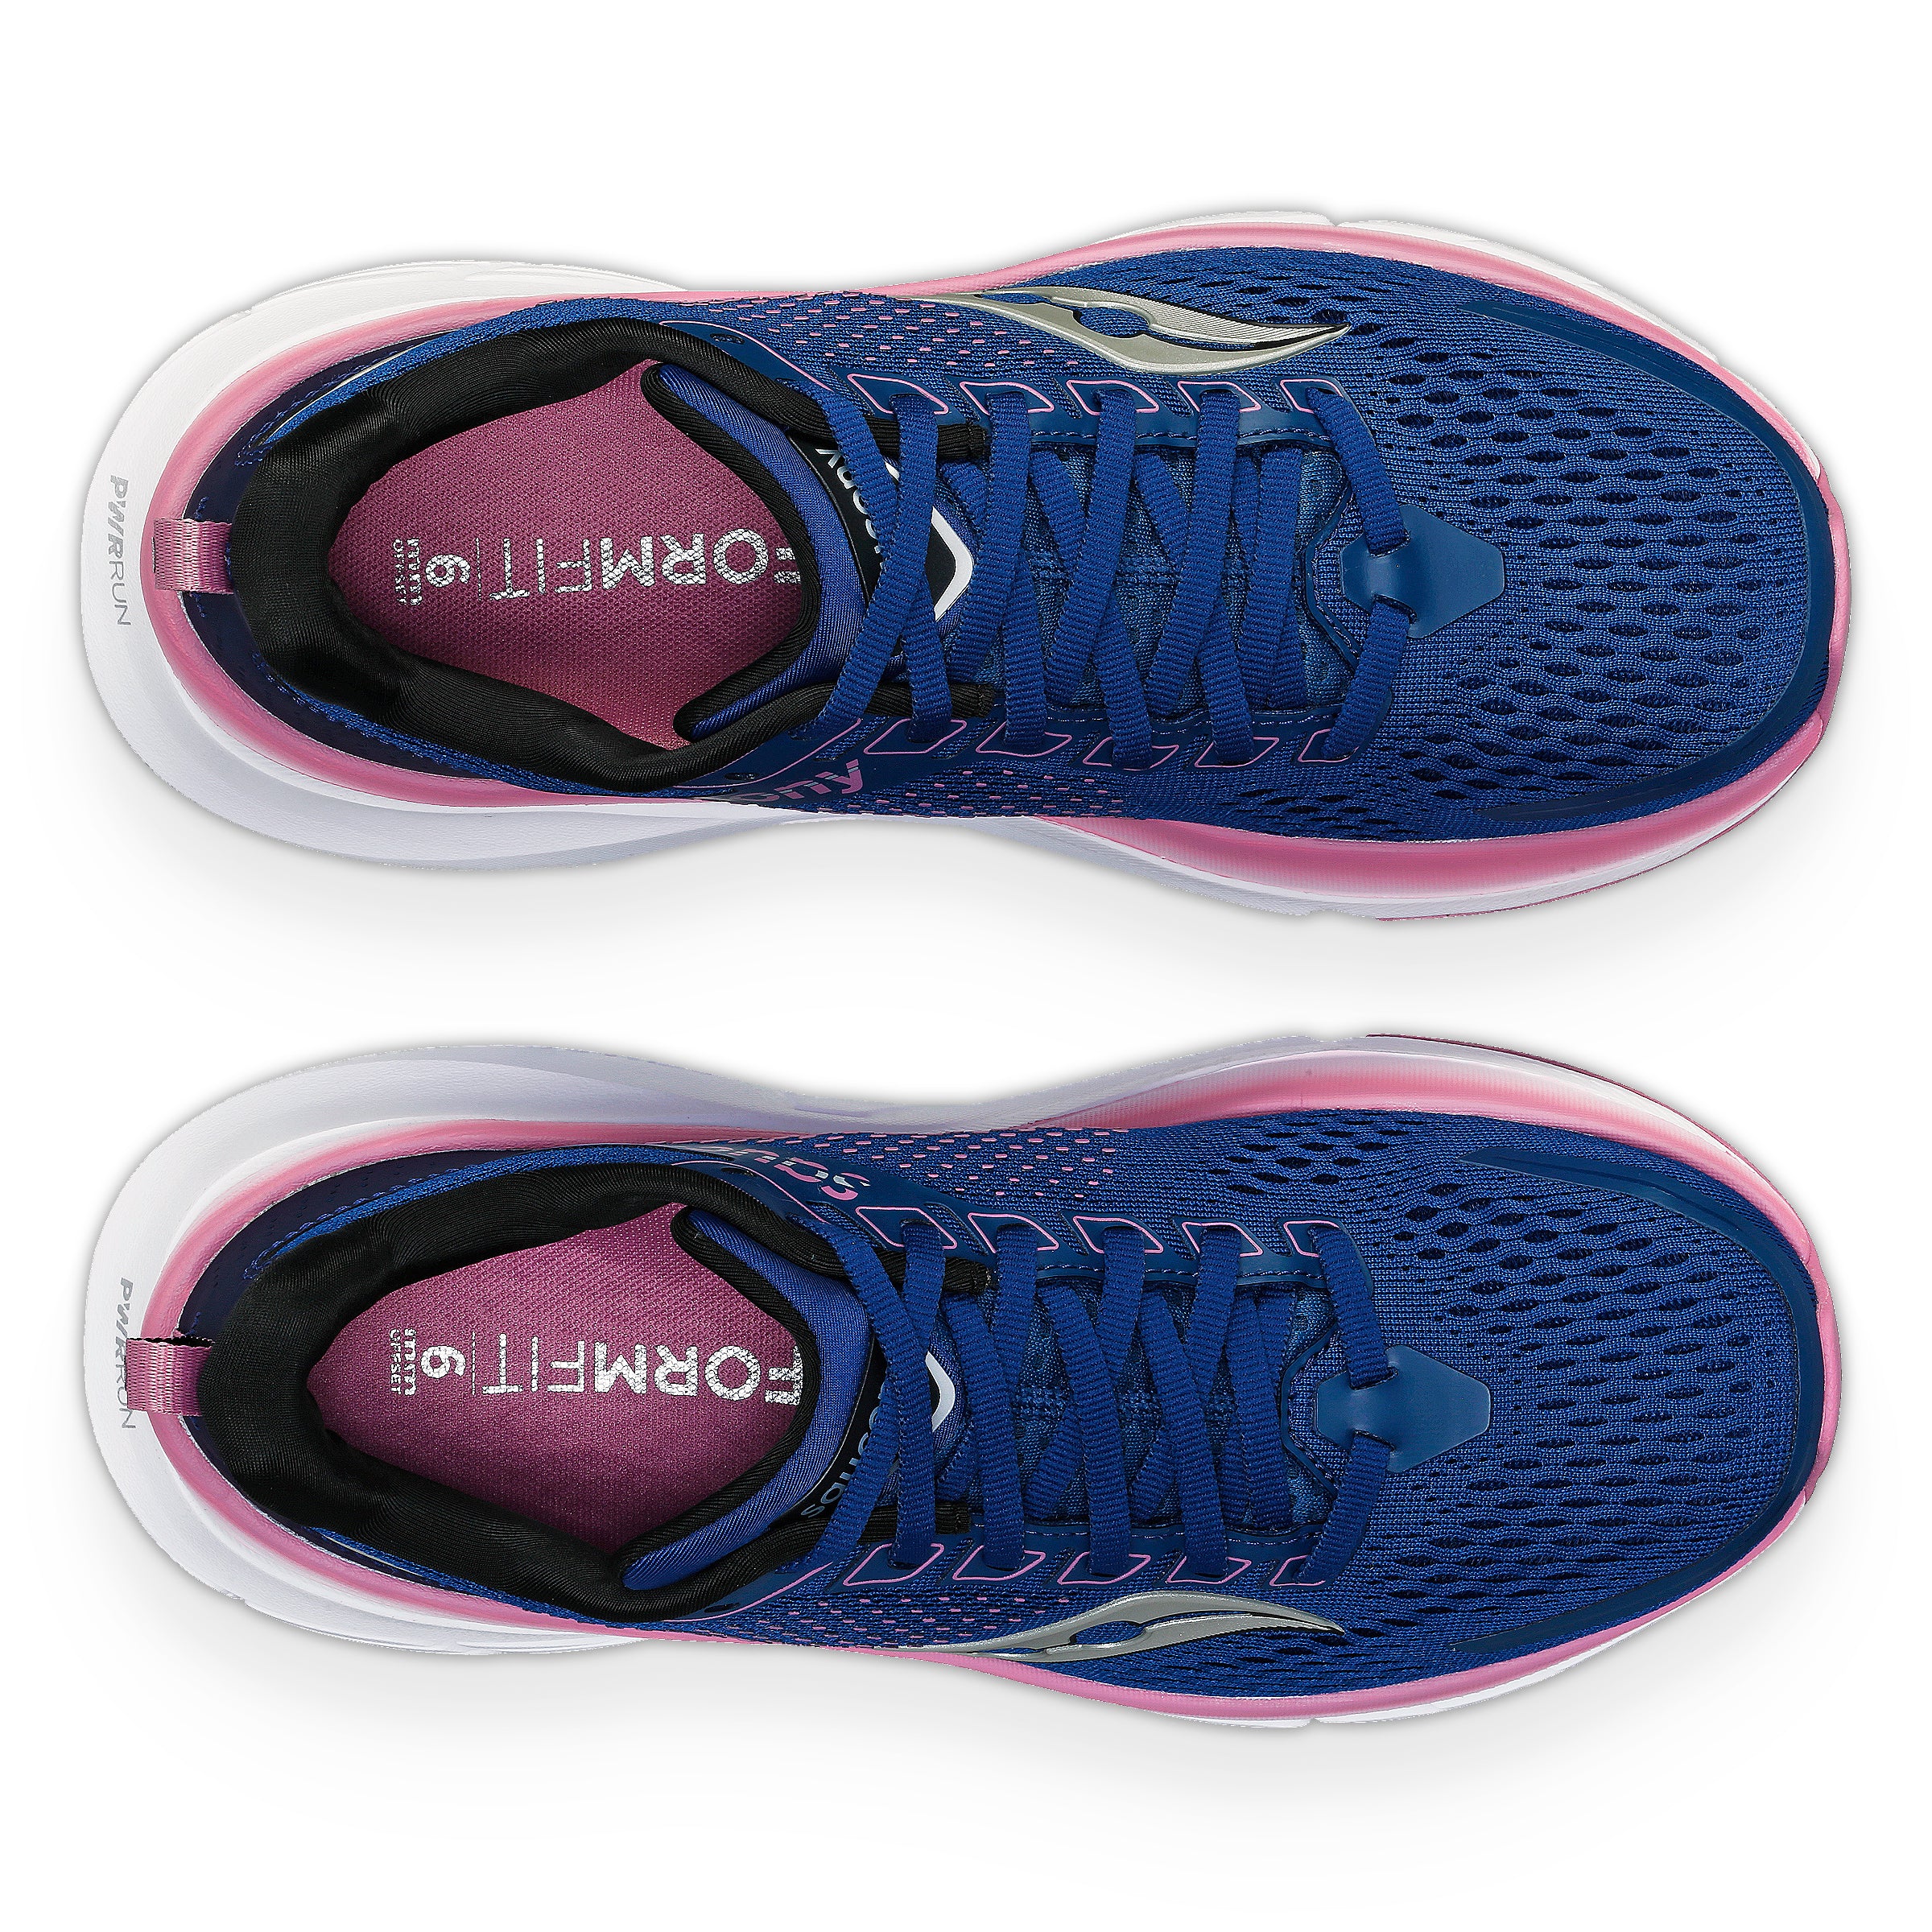 WOMEN'S GUIDE 17 - WIDE D - 106 NAVY/ORCHID